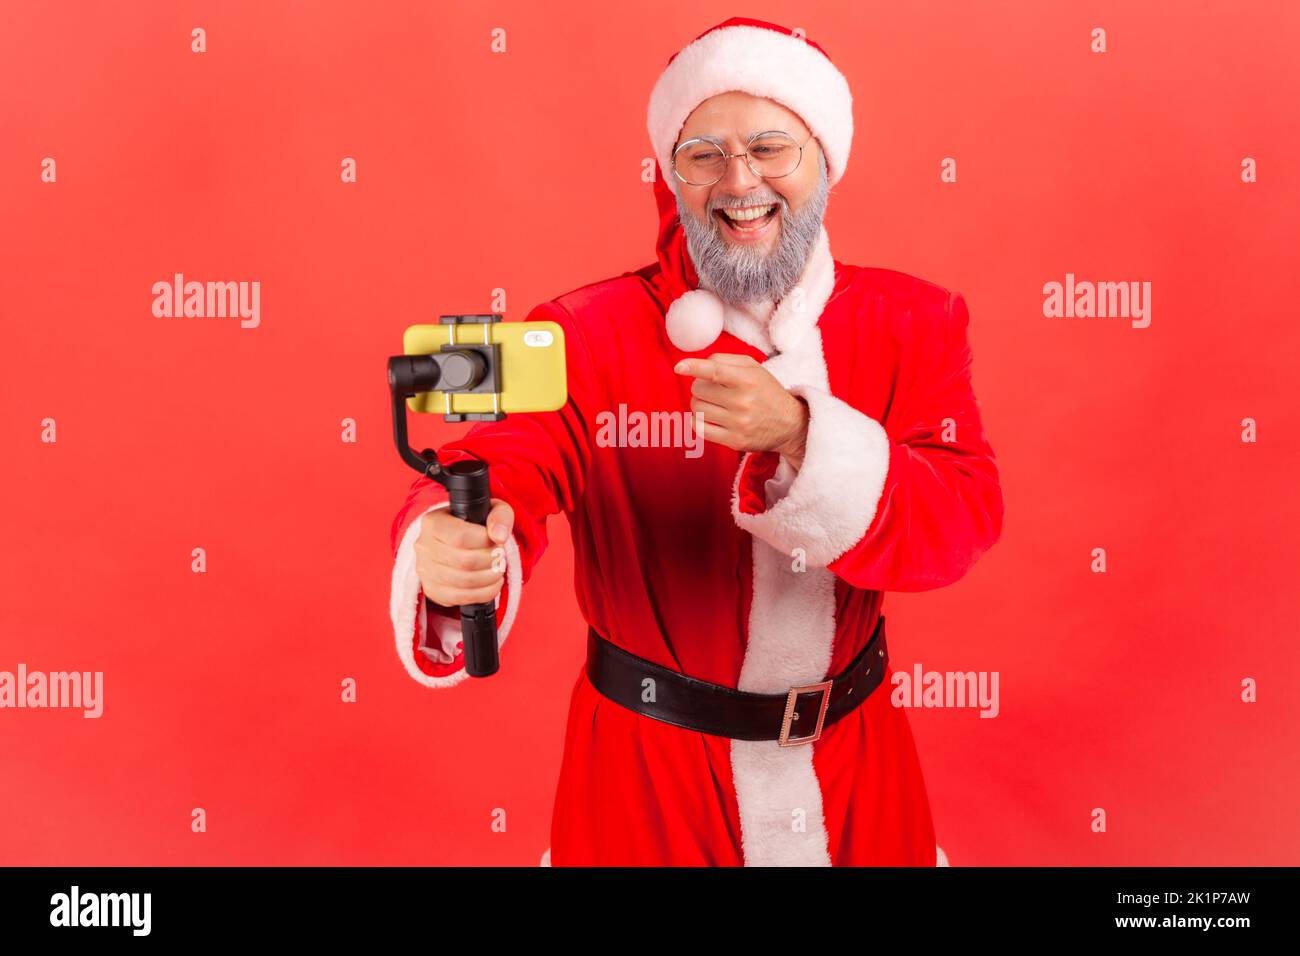 Elderly blogger man with gray beard wearing santa claus costume broadcasting livestream, using phone and steadicam, pointing finger to device display. Indoor studio shot isolated on red background. Stock Photo